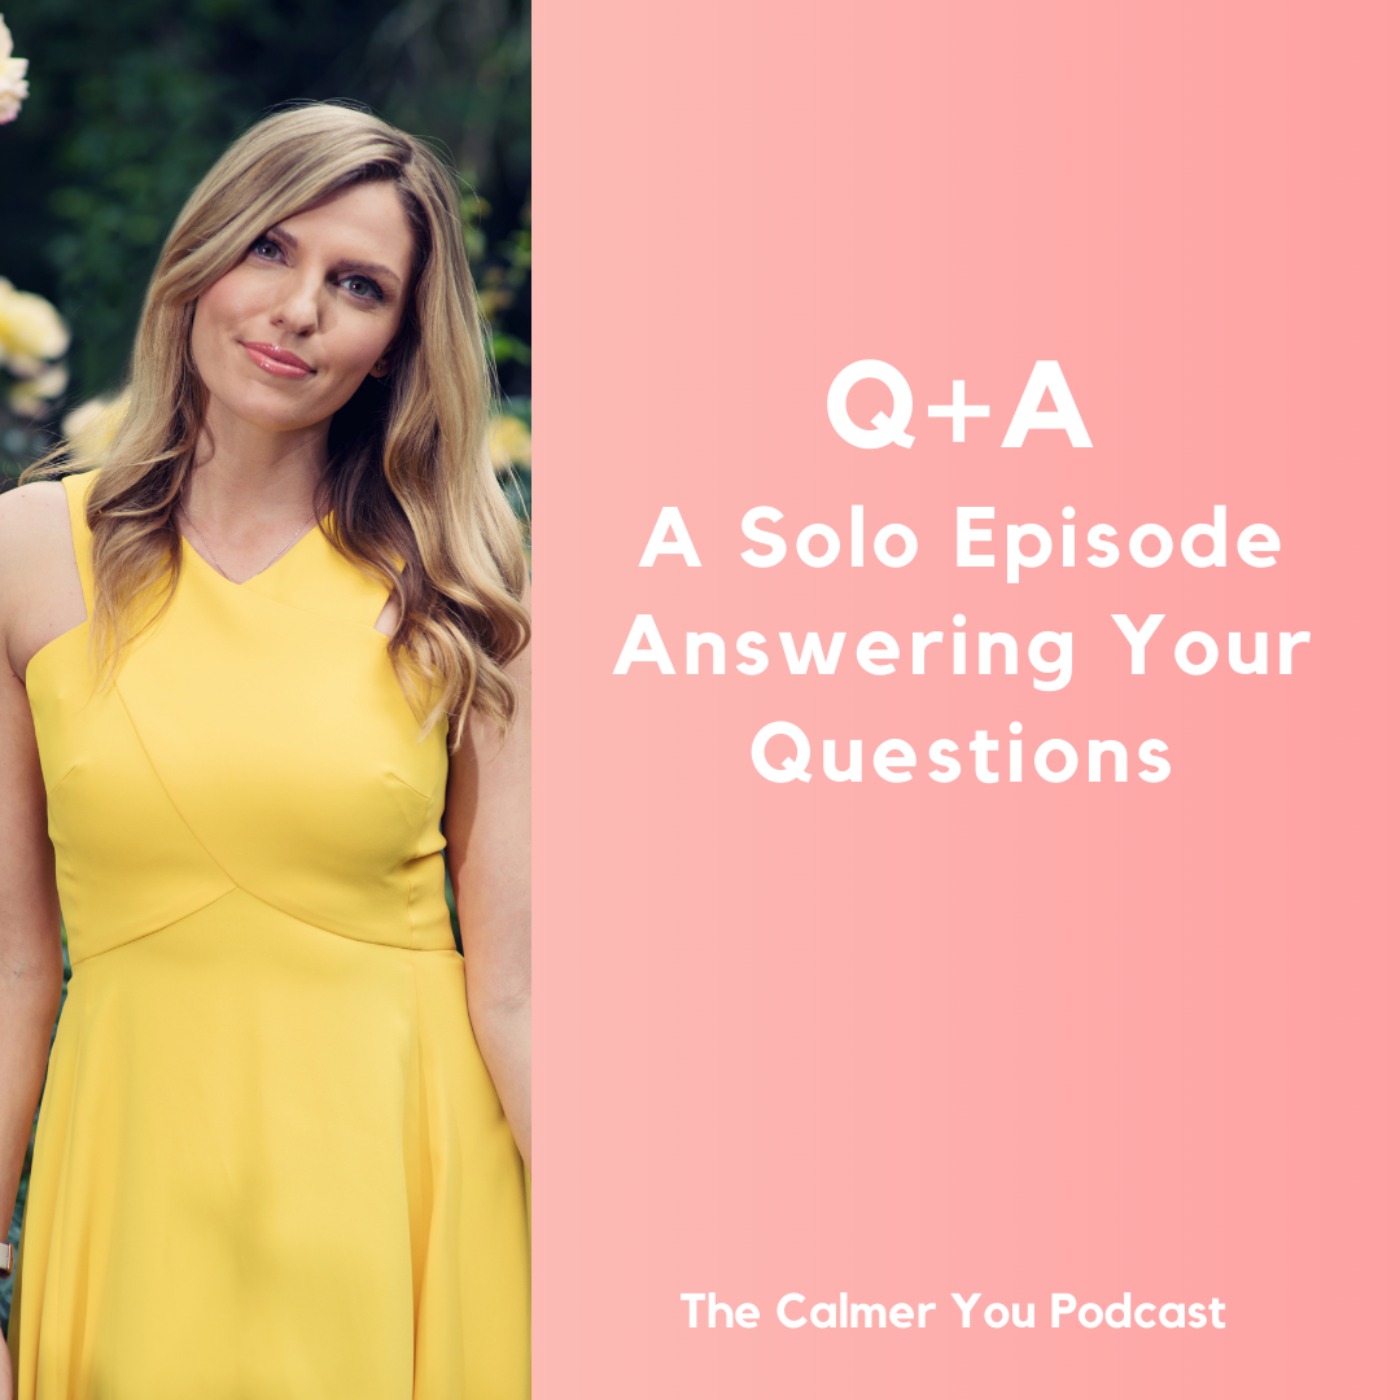 Ep 181. Q+A - A Solo Episode Answering Your Questions